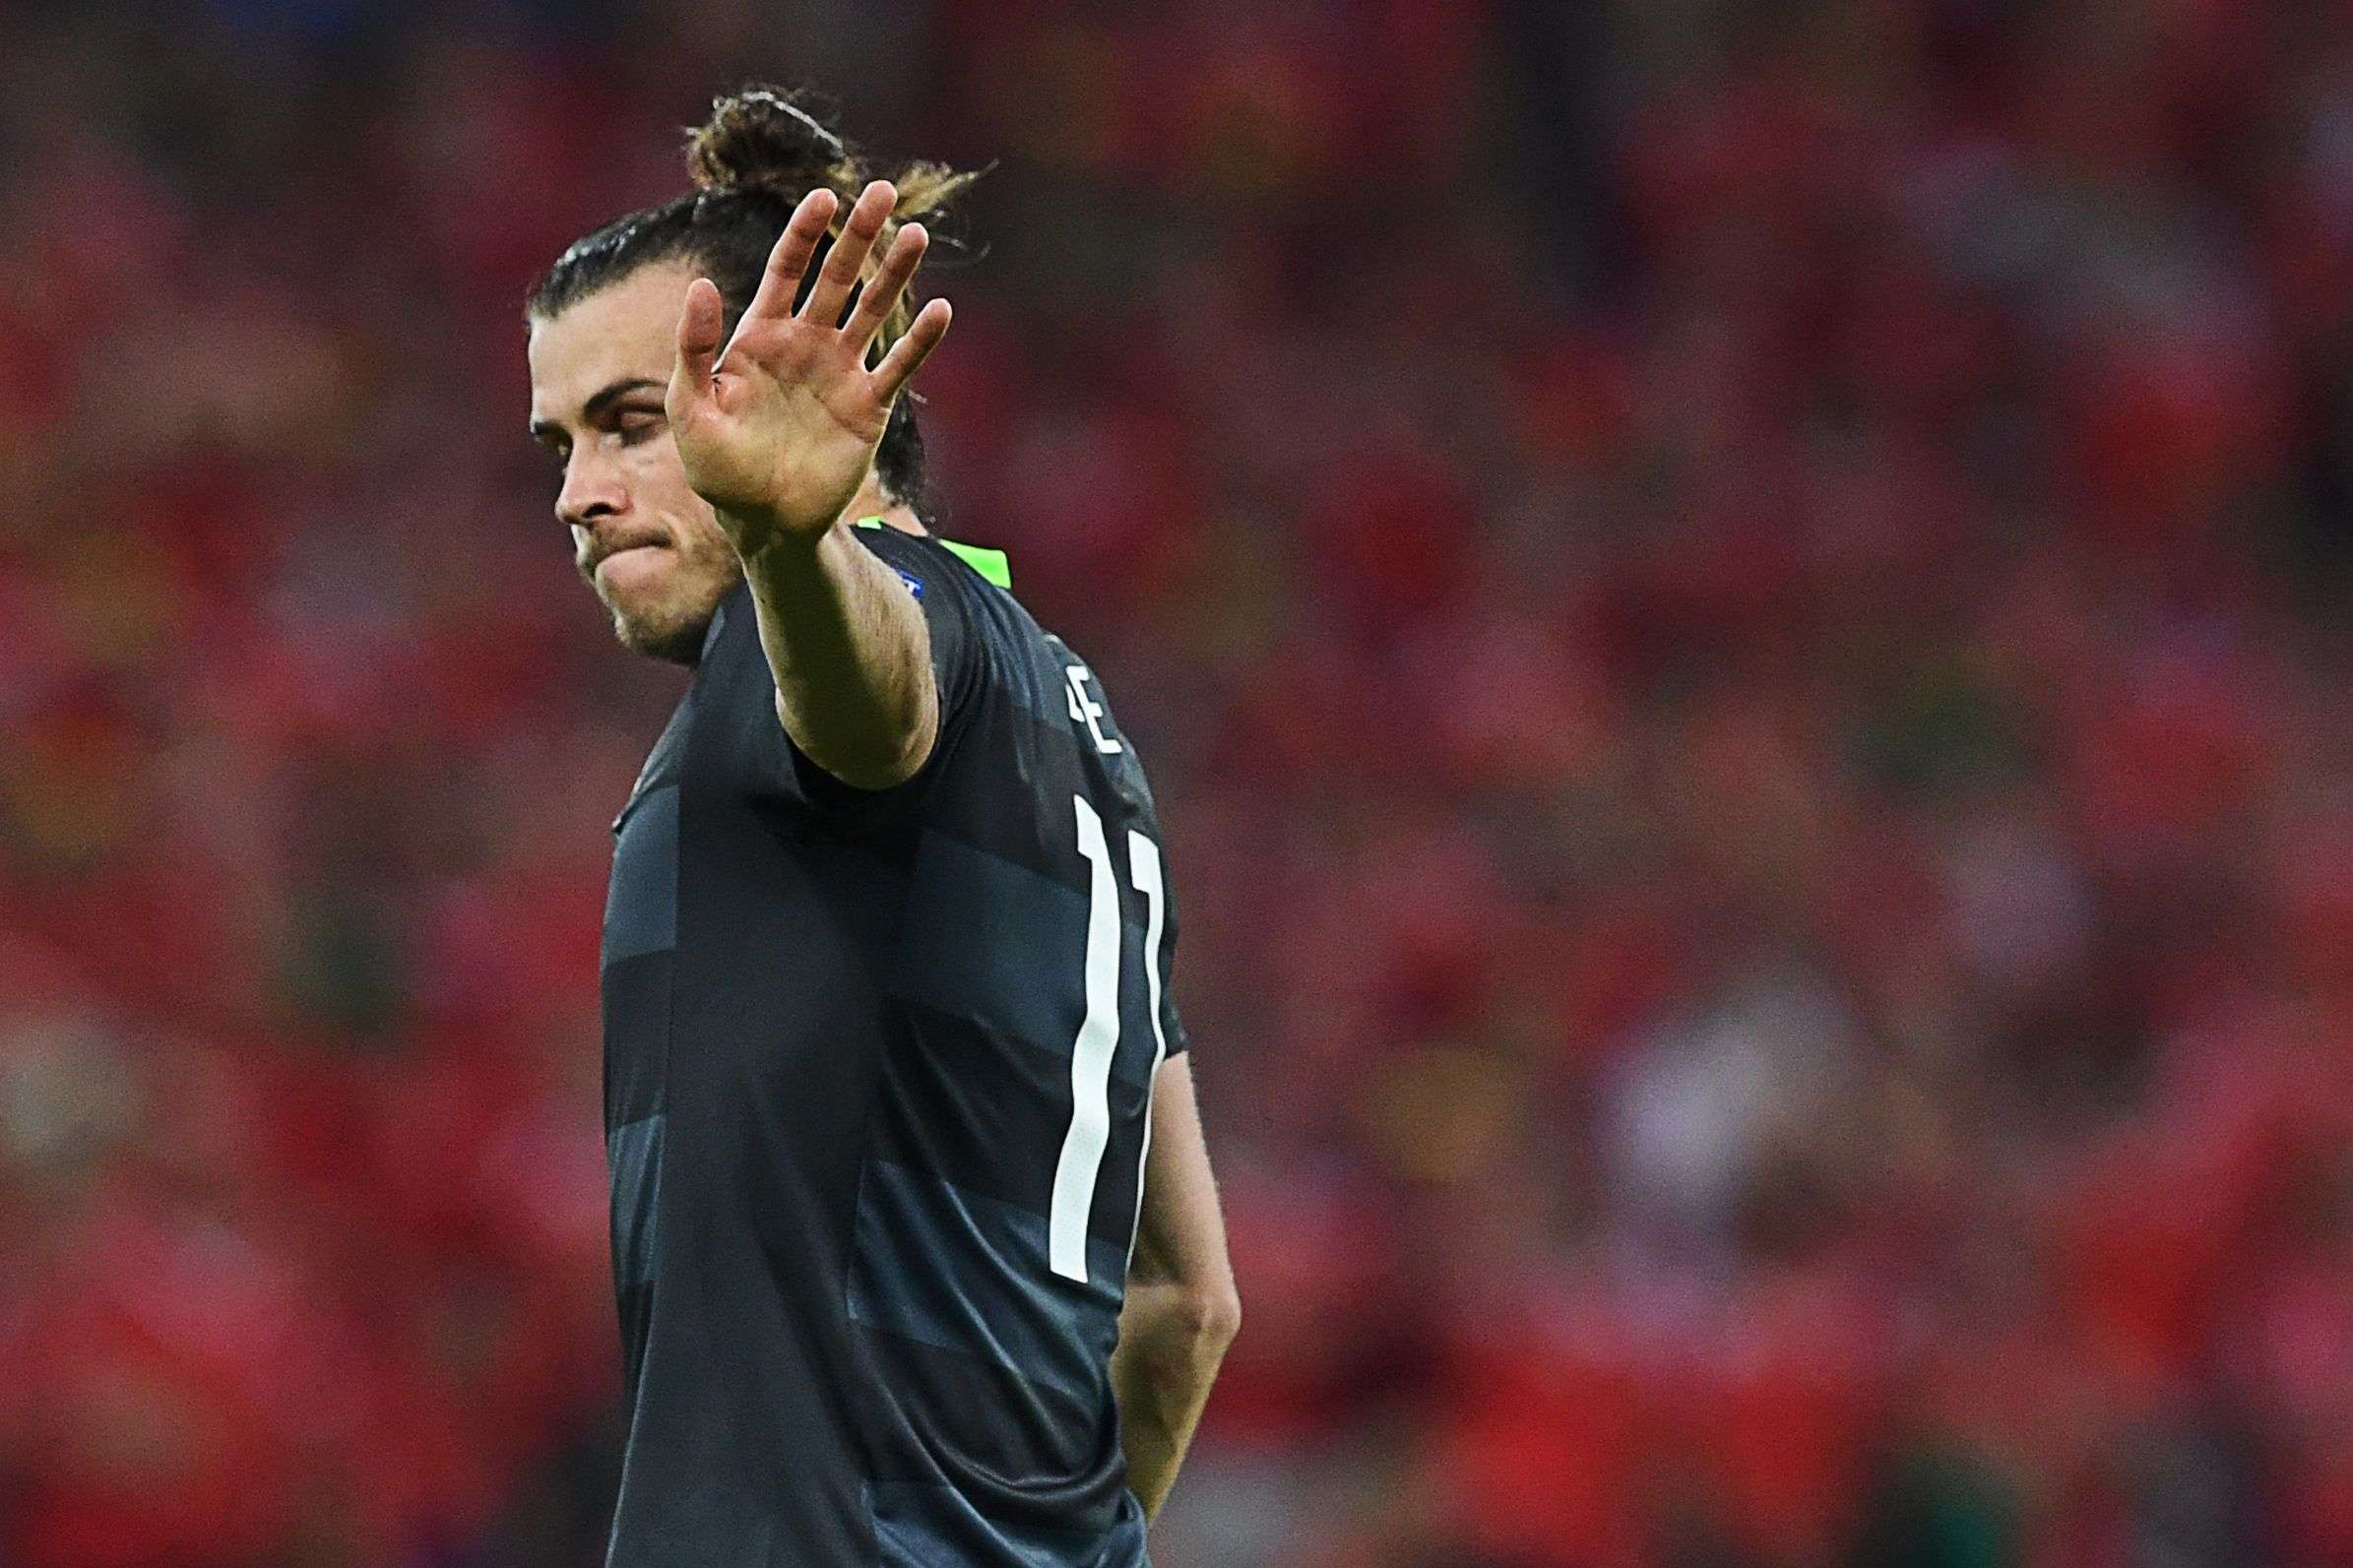 Gareth Bale waves farewell to the fans. Photo: AFP